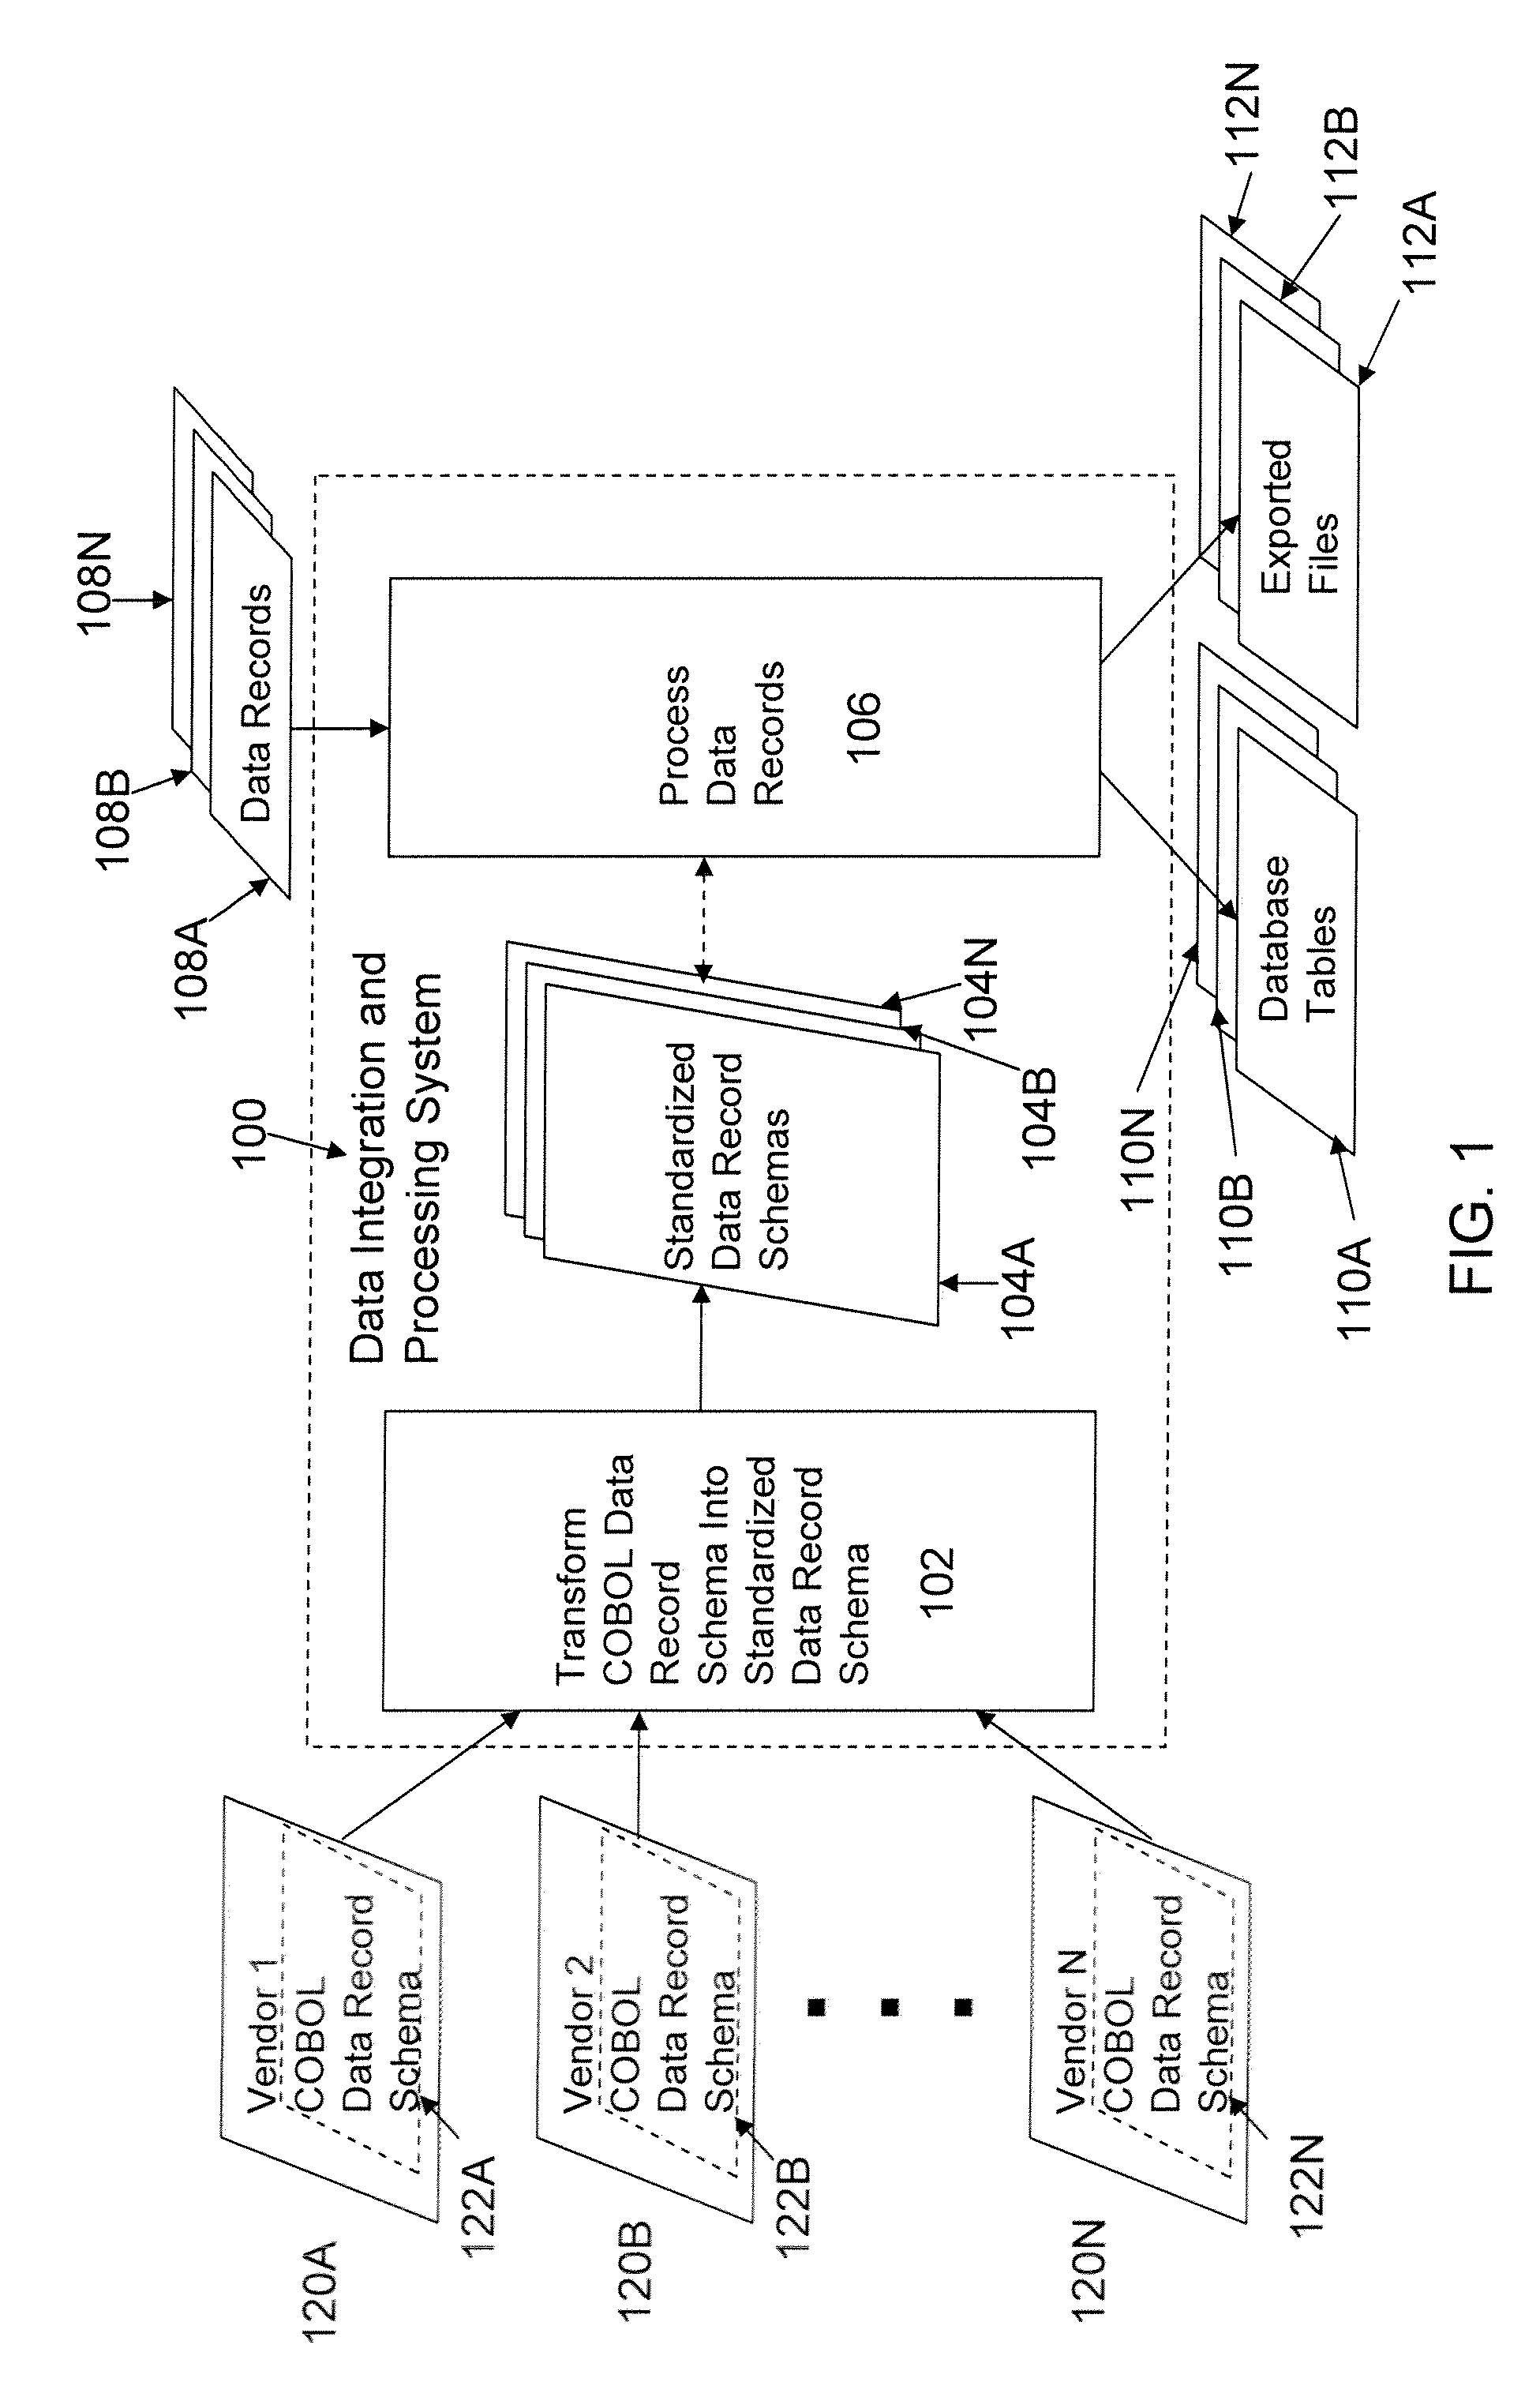 Apparatus and method for processing of COBOL nested data record schemas